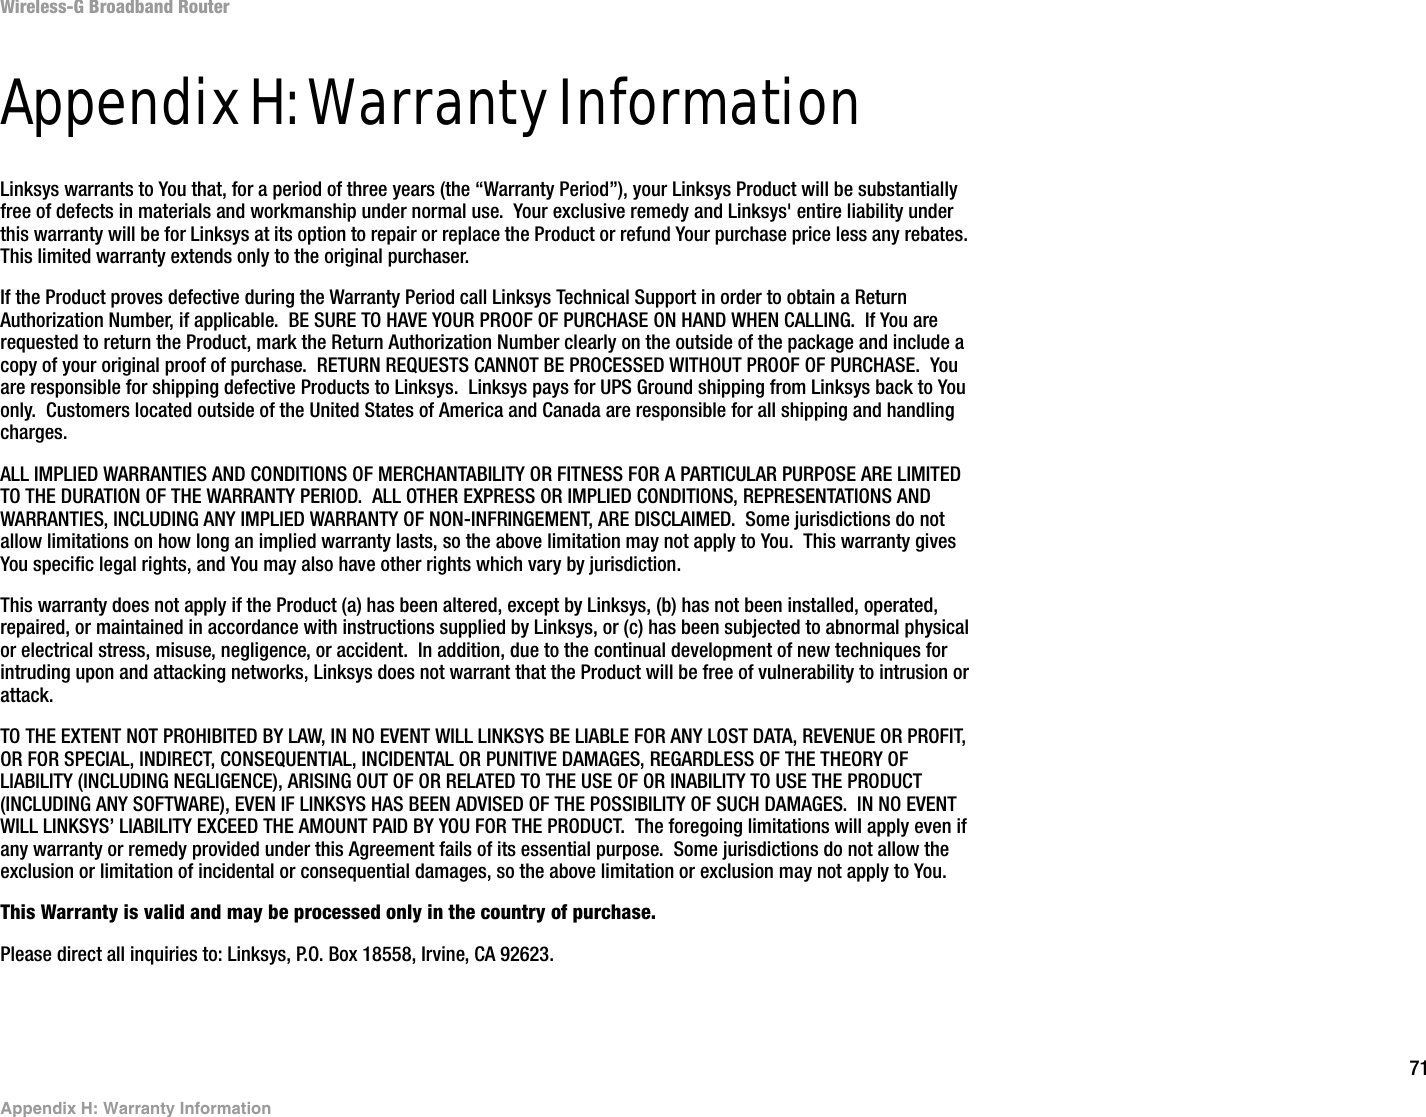 71Appendix H: Warranty InformationWireless-G Broadband RouterAppendix H: Warranty InformationLinksys warrants to You that, for a period of three years (the “Warranty Period”), your Linksys Product will be substantially free of defects in materials and workmanship under normal use.  Your exclusive remedy and Linksys&apos; entire liability under this warranty will be for Linksys at its option to repair or replace the Product or refund Your purchase price less any rebates.  This limited warranty extends only to the original purchaser.  If the Product proves defective during the Warranty Period call Linksys Technical Support in order to obtain a Return Authorization Number, if applicable.  BE SURE TO HAVE YOUR PROOF OF PURCHASE ON HAND WHEN CALLING.  If You are requested to return the Product, mark the Return Authorization Number clearly on the outside of the package and include a copy of your original proof of purchase.  RETURN REQUESTS CANNOT BE PROCESSED WITHOUT PROOF OF PURCHASE.  You are responsible for shipping defective Products to Linksys.  Linksys pays for UPS Ground shipping from Linksys back to You only.  Customers located outside of the United States of America and Canada are responsible for all shipping and handling charges. ALL IMPLIED WARRANTIES AND CONDITIONS OF MERCHANTABILITY OR FITNESS FOR A PARTICULAR PURPOSE ARE LIMITED TO THE DURATION OF THE WARRANTY PERIOD.  ALL OTHER EXPRESS OR IMPLIED CONDITIONS, REPRESENTATIONS AND WARRANTIES, INCLUDING ANY IMPLIED WARRANTY OF NON-INFRINGEMENT, ARE DISCLAIMED.  Some jurisdictions do not allow limitations on how long an implied warranty lasts, so the above limitation may not apply to You.  This warranty gives You specific legal rights, and You may also have other rights which vary by jurisdiction.This warranty does not apply if the Product (a) has been altered, except by Linksys, (b) has not been installed, operated, repaired, or maintained in accordance with instructions supplied by Linksys, or (c) has been subjected to abnormal physical or electrical stress, misuse, negligence, or accident.  In addition, due to the continual development of new techniques for intruding upon and attacking networks, Linksys does not warrant that the Product will be free of vulnerability to intrusion or attack.TO THE EXTENT NOT PROHIBITED BY LAW, IN NO EVENT WILL LINKSYS BE LIABLE FOR ANY LOST DATA, REVENUE OR PROFIT, OR FOR SPECIAL, INDIRECT, CONSEQUENTIAL, INCIDENTAL OR PUNITIVE DAMAGES, REGARDLESS OF THE THEORY OF LIABILITY (INCLUDING NEGLIGENCE), ARISING OUT OF OR RELATED TO THE USE OF OR INABILITY TO USE THE PRODUCT (INCLUDING ANY SOFTWARE), EVEN IF LINKSYS HAS BEEN ADVISED OF THE POSSIBILITY OF SUCH DAMAGES.  IN NO EVENT WILL LINKSYS’ LIABILITY EXCEED THE AMOUNT PAID BY YOU FOR THE PRODUCT.  The foregoing limitations will apply even if any warranty or remedy provided under this Agreement fails of its essential purpose.  Some jurisdictions do not allow the exclusion or limitation of incidental or consequential damages, so the above limitation or exclusion may not apply to You.This Warranty is valid and may be processed only in the country of purchase.Please direct all inquiries to: Linksys, P.O. Box 18558, Irvine, CA 92623.